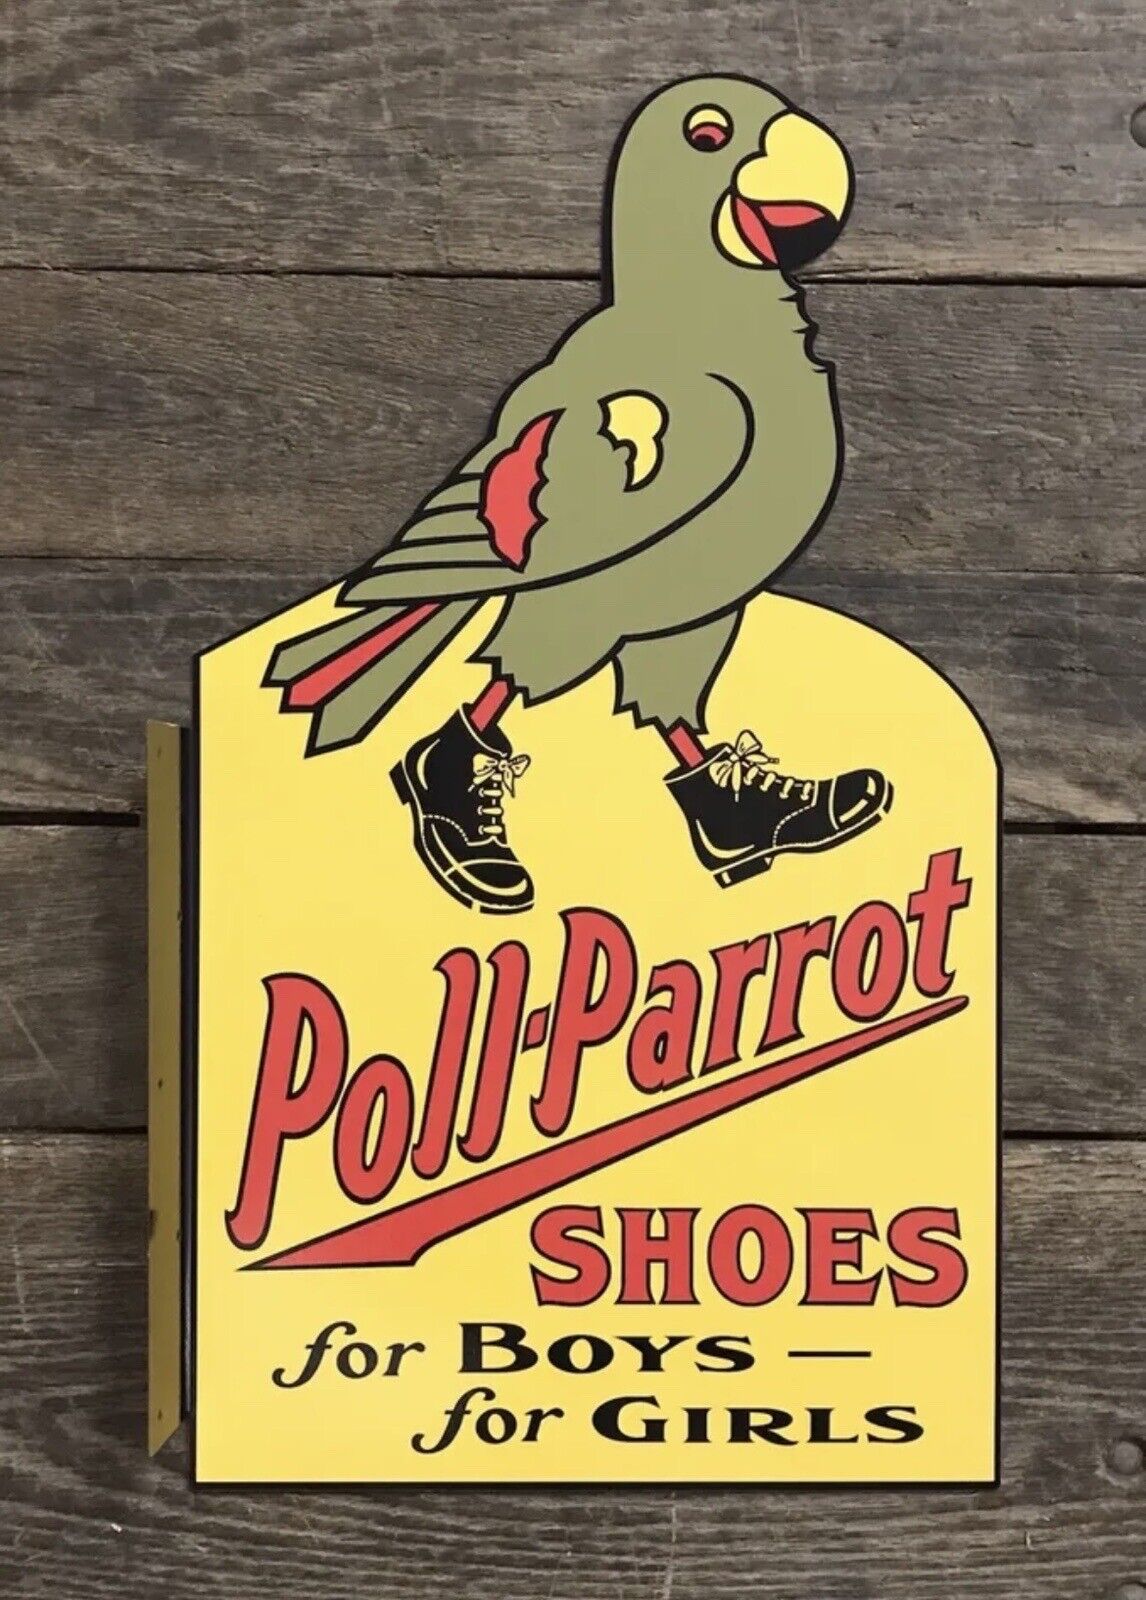 POLL-PARROT “For Boys & For Girls”  Children Shoes Flange Sign, ,23.5” x 13.5”